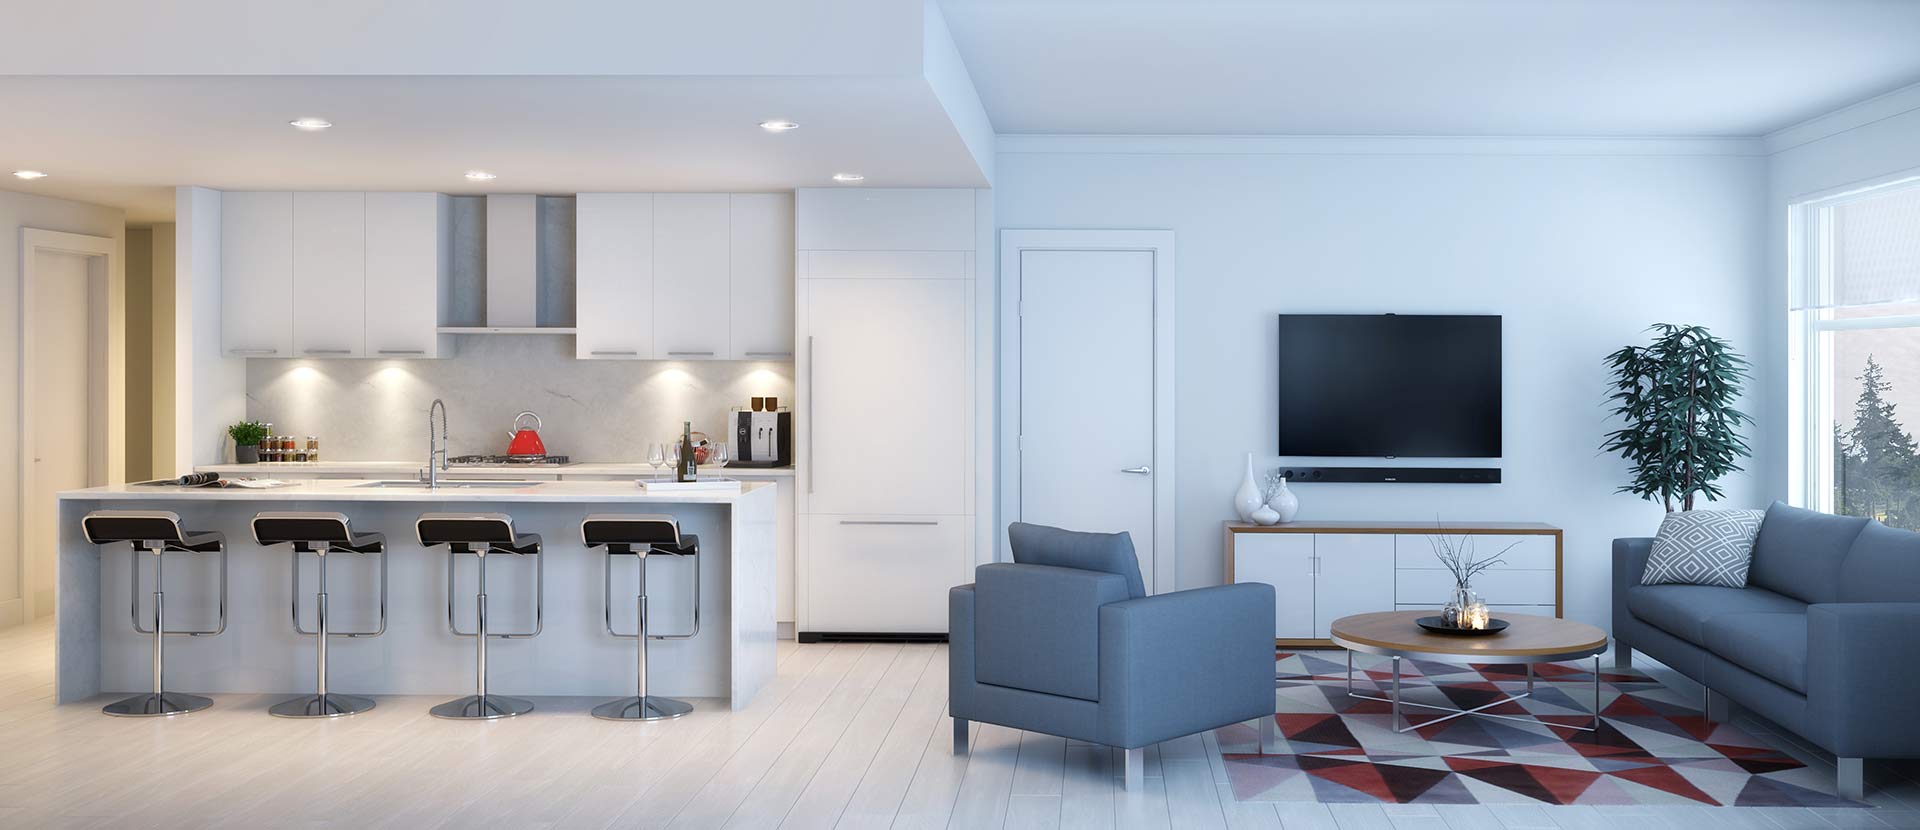 Virtuoso townhome living room and kitchen rendering